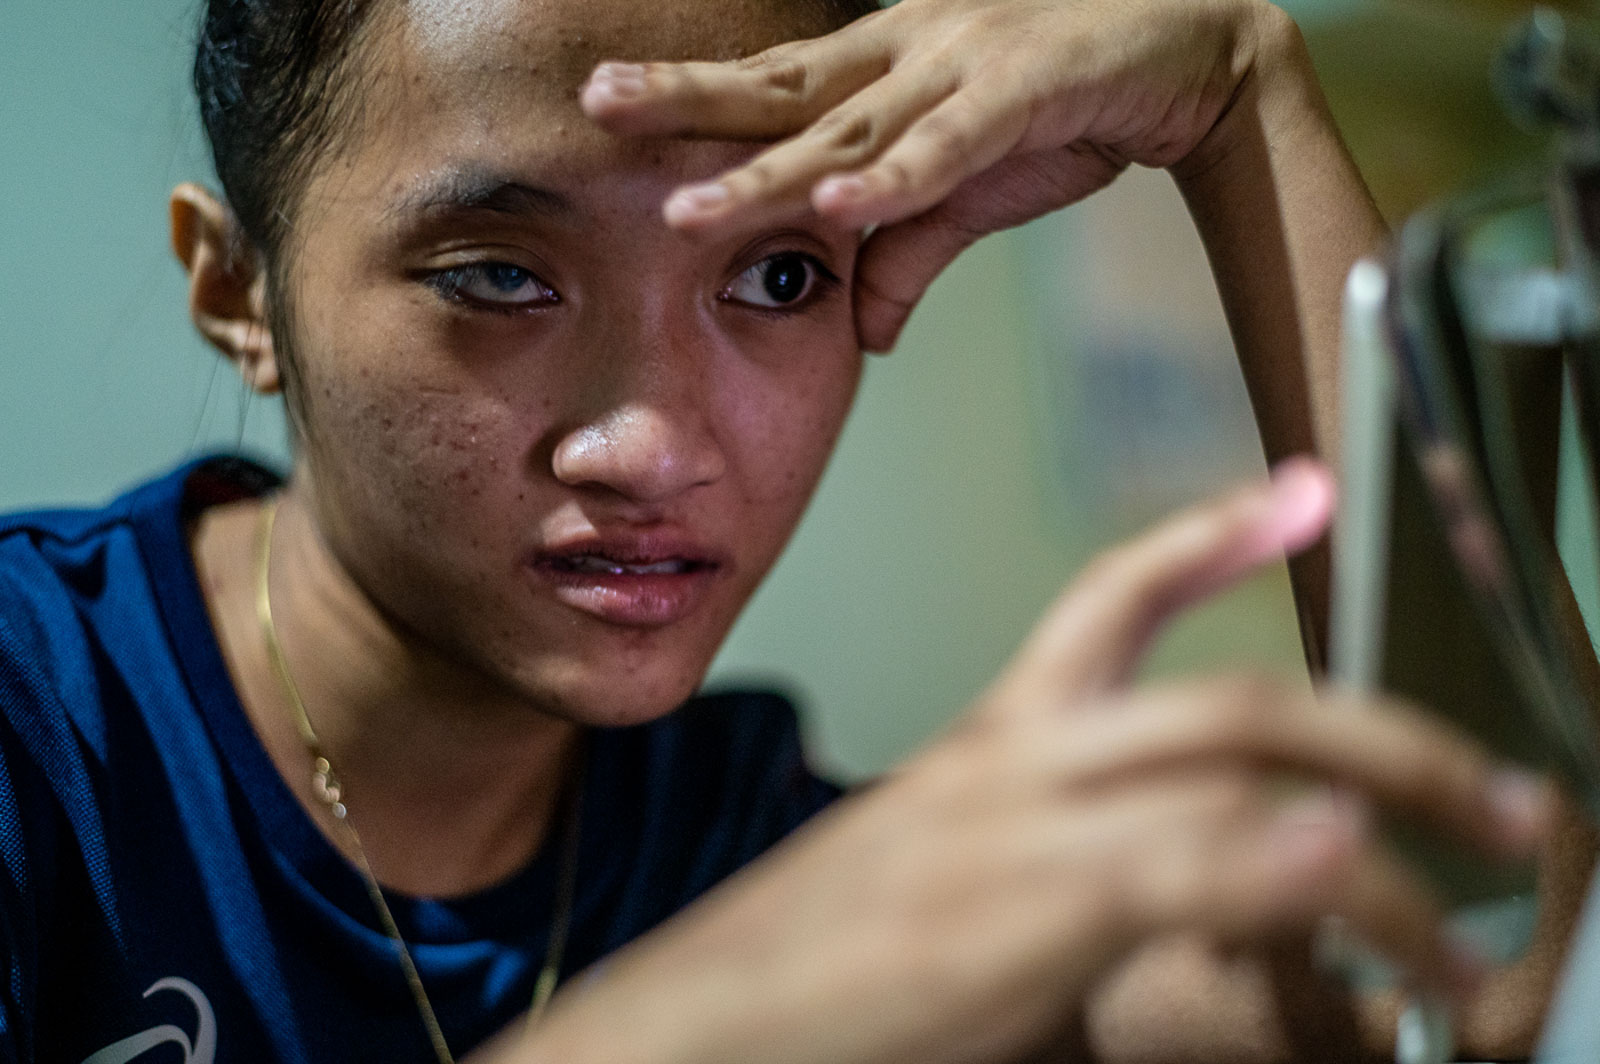 The disproportionate impact of COVID-19 pandemic among Filipinos with visual impairments